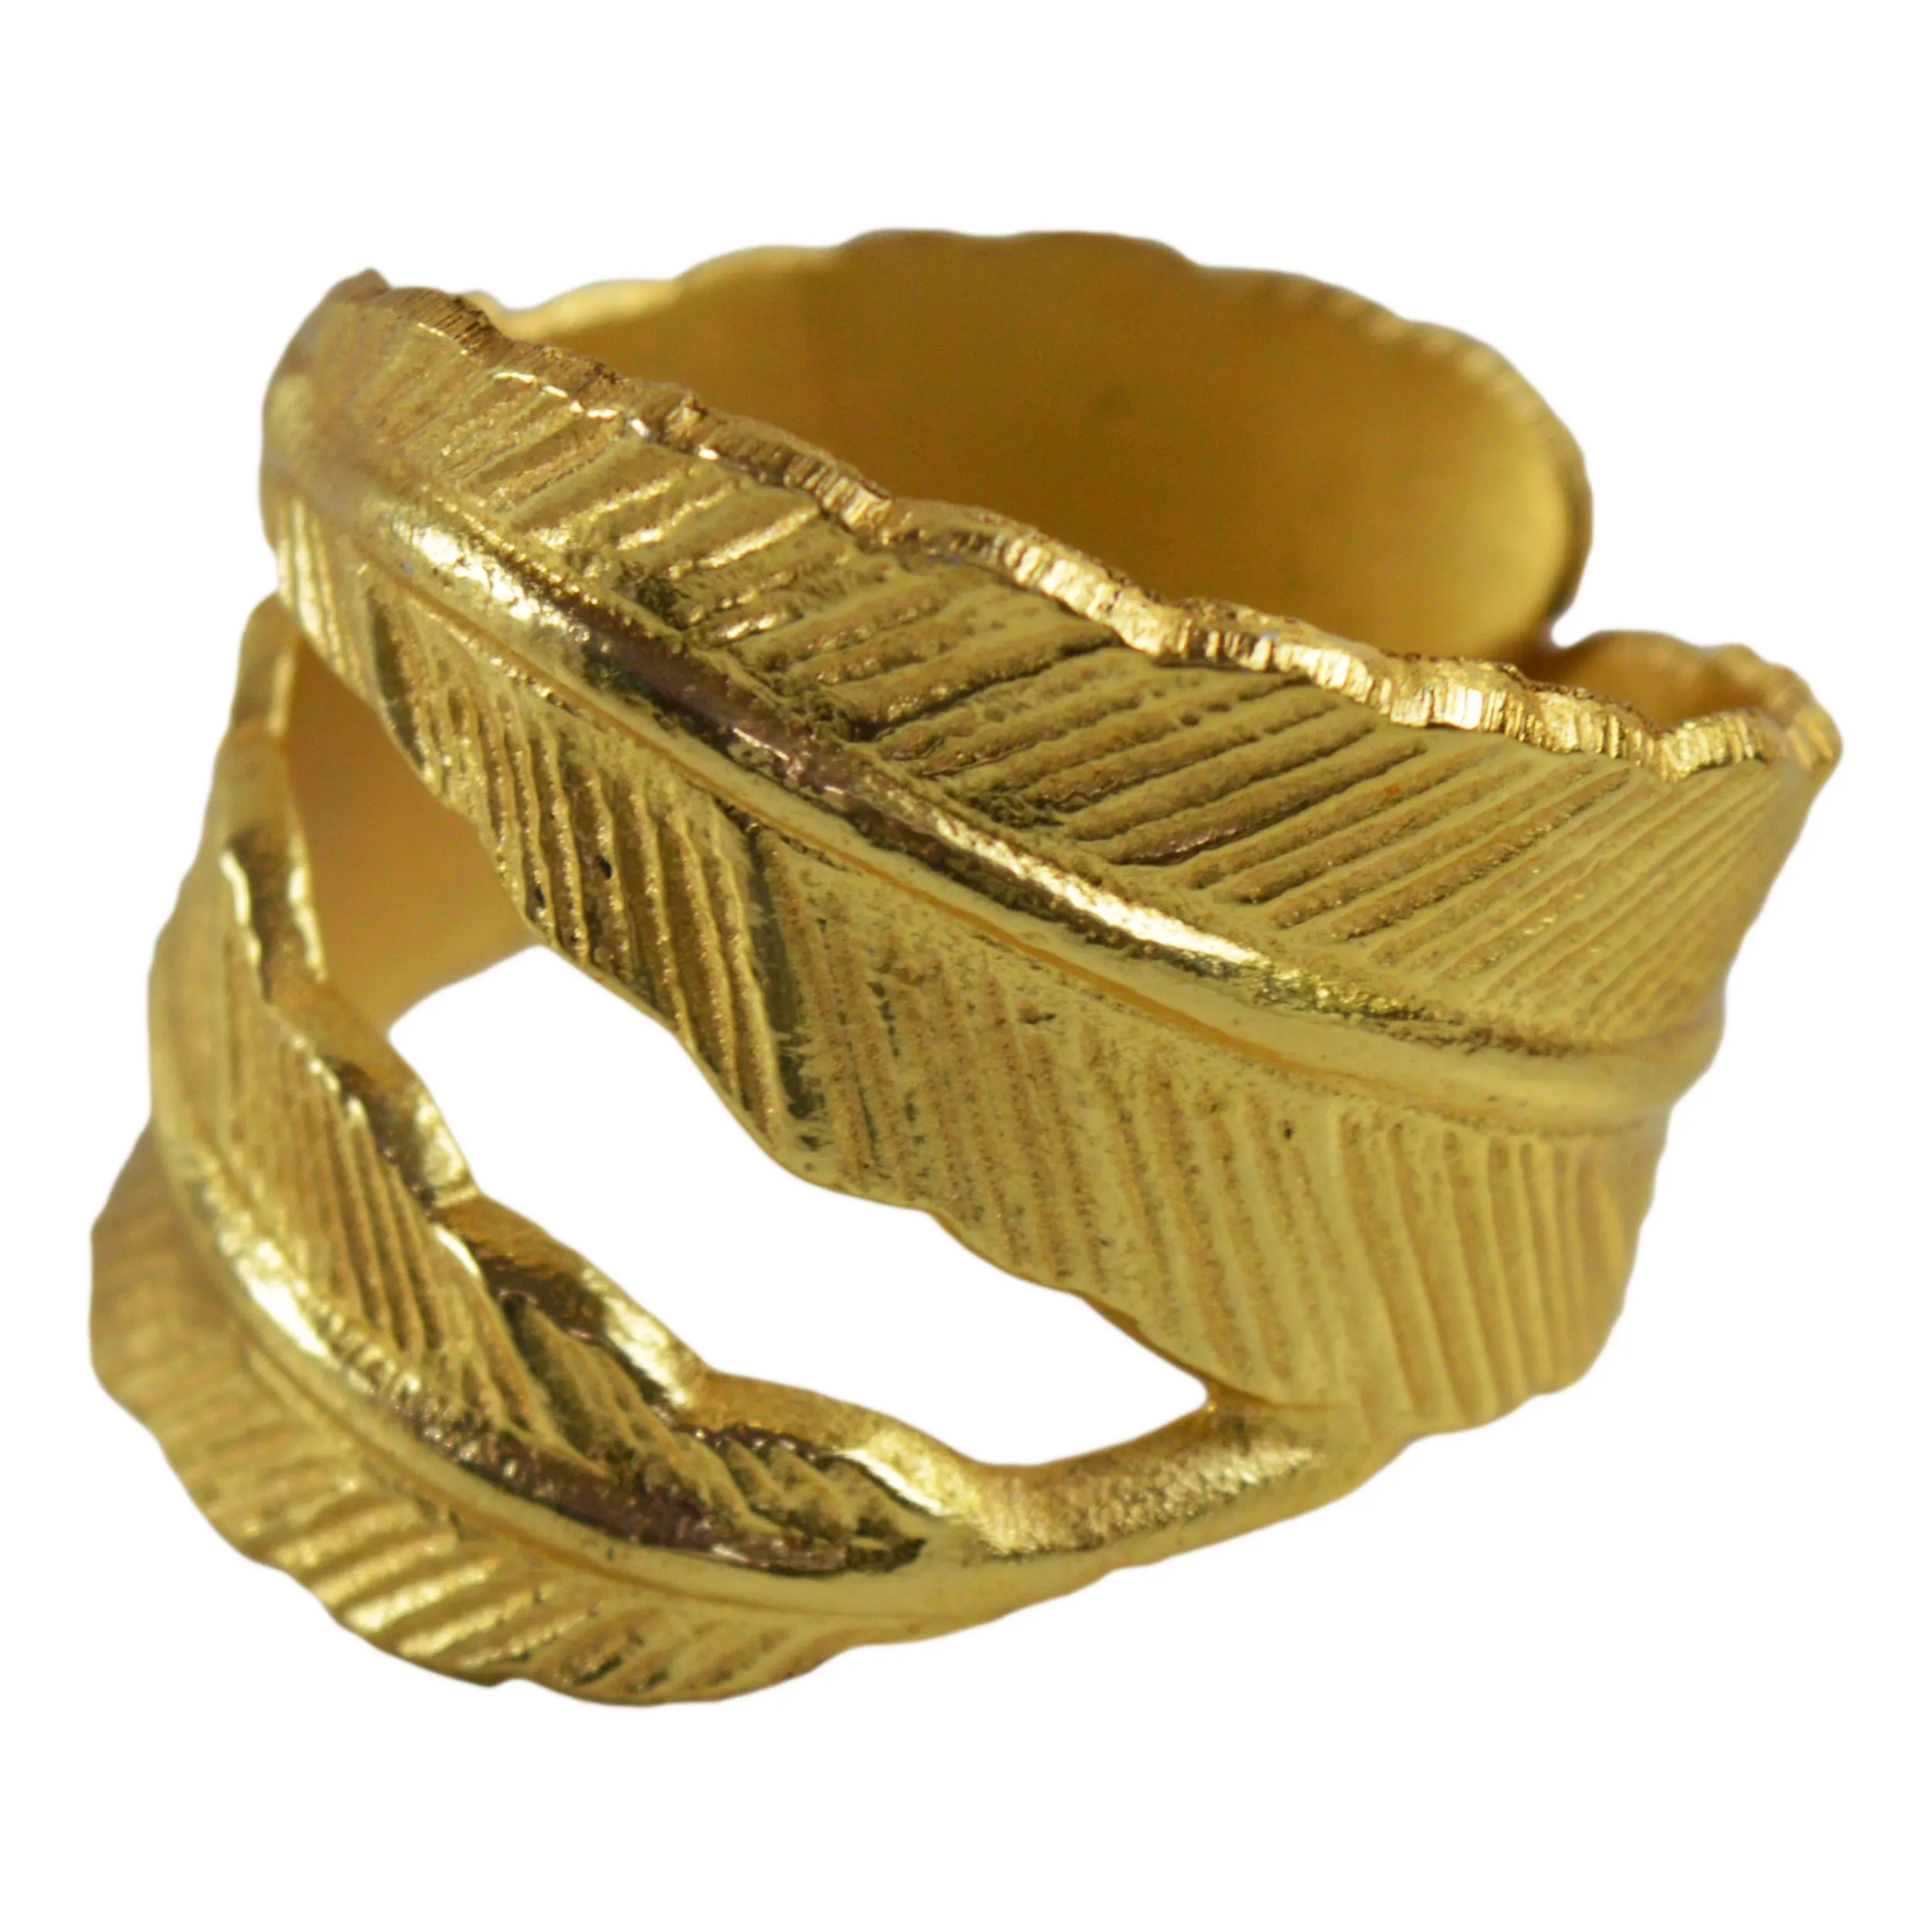 Top-Notch Quality Metal Napkin Ring With Gold Plated Finishing Metal Napkin Ring For Event Party Catering Decors Use Napkin Ring